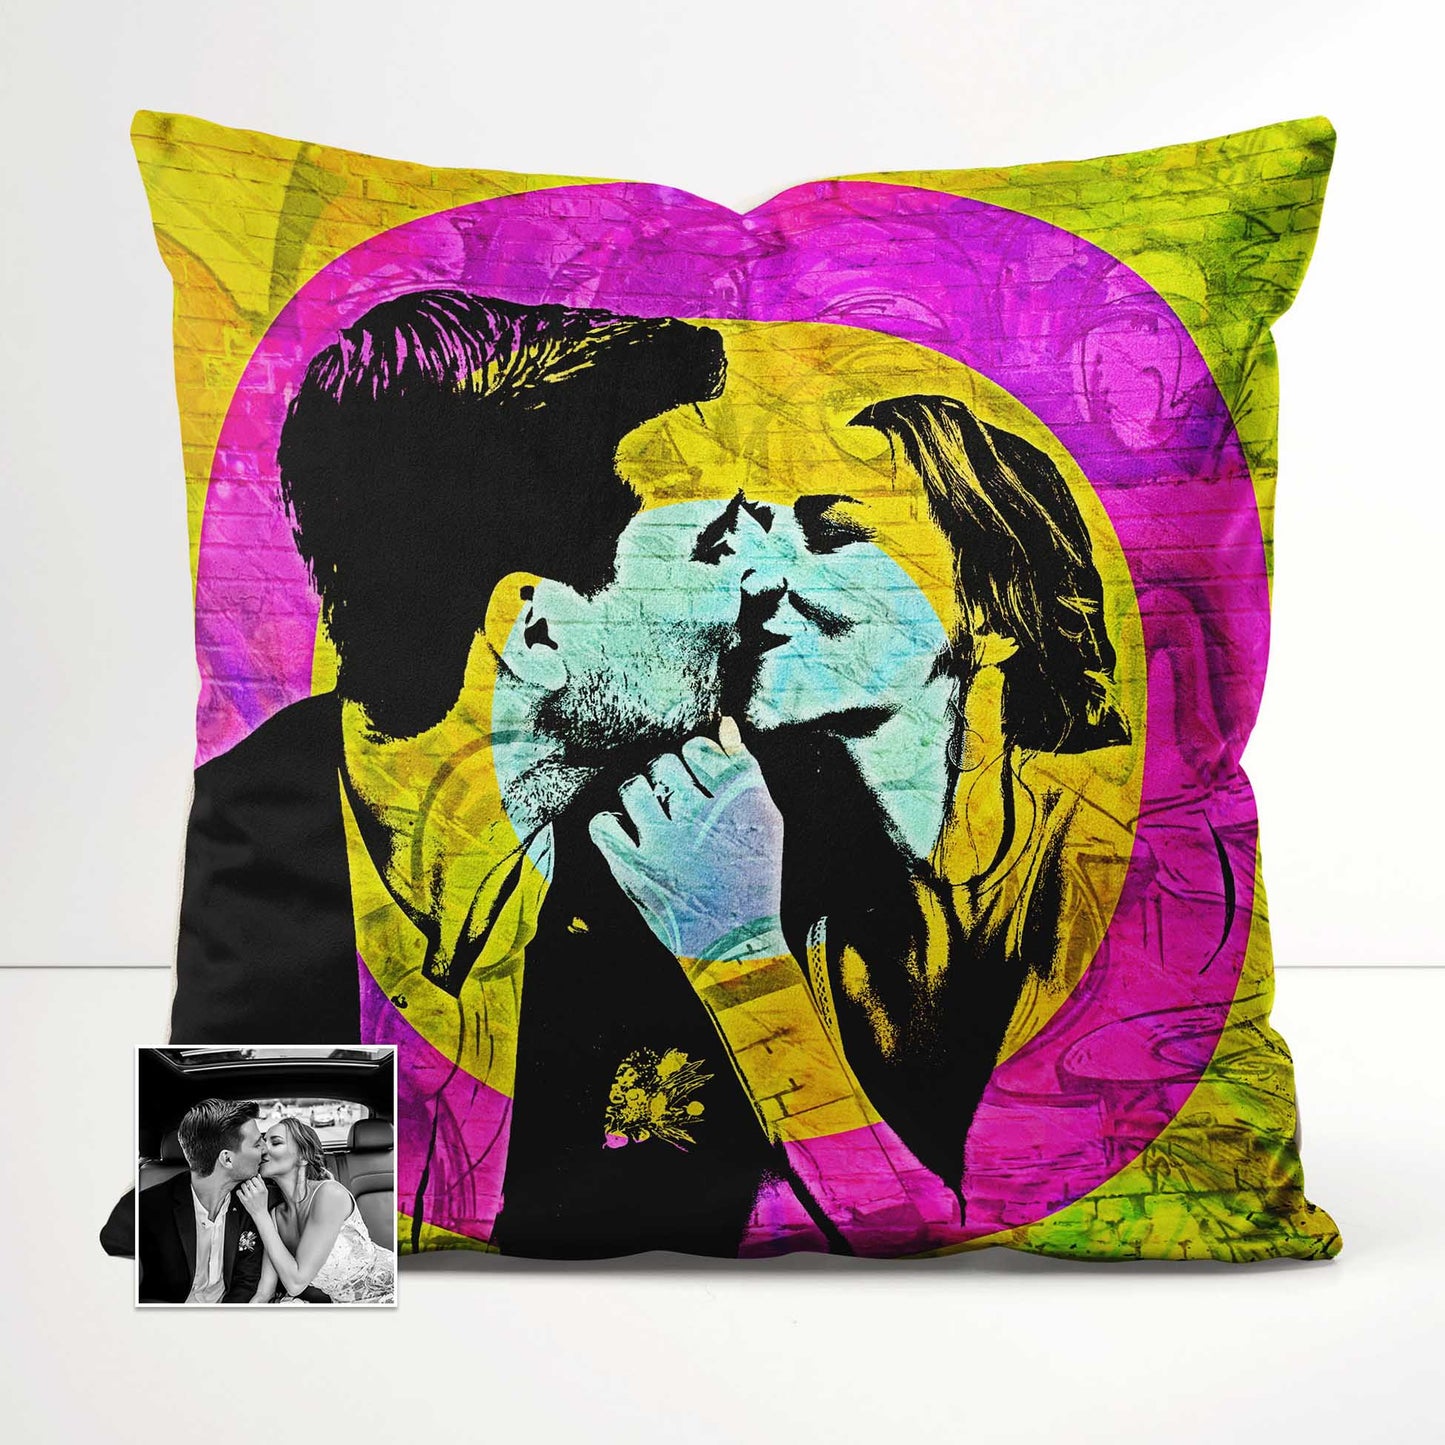 Add a burst of creativity to your home decor with the Personalised Graffiti Street Art Cushion. Printed from your photo, this cushion showcases vivid and vibrant colors that capture the essence of urban street art, unique and original